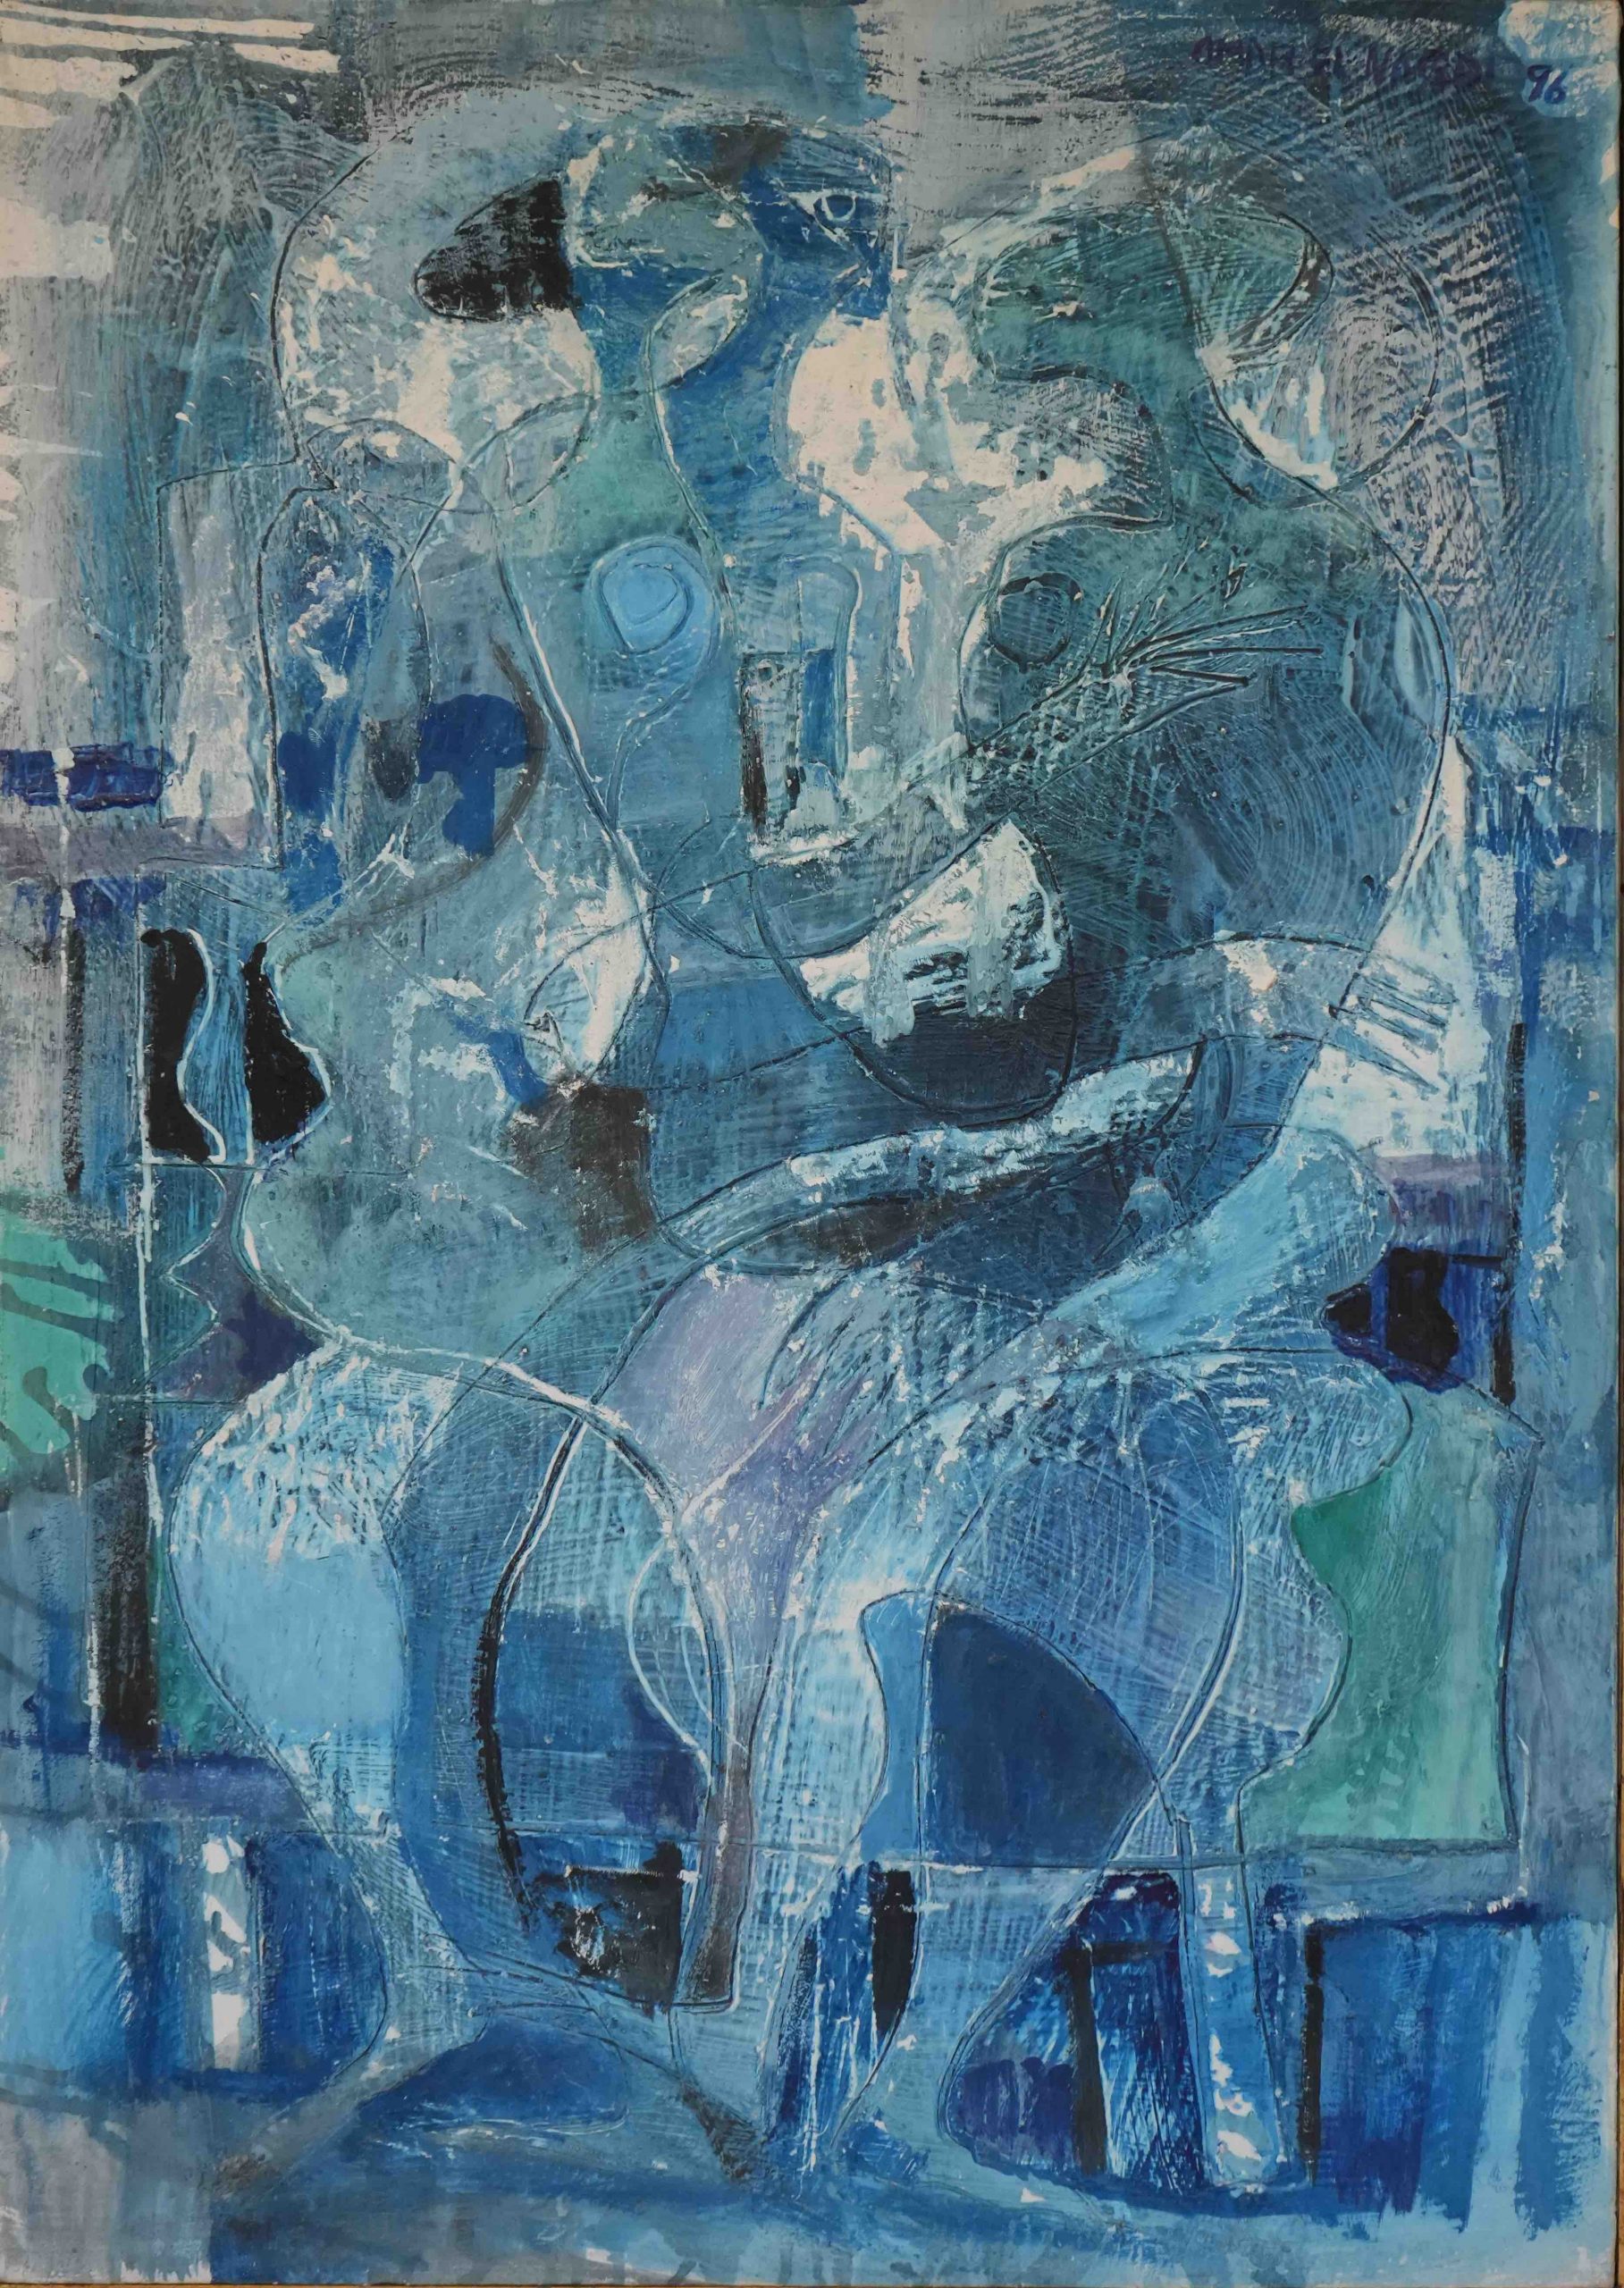 Omar El Nagdi Oil on canvas 100 x 70 cm Signed and dated 1996